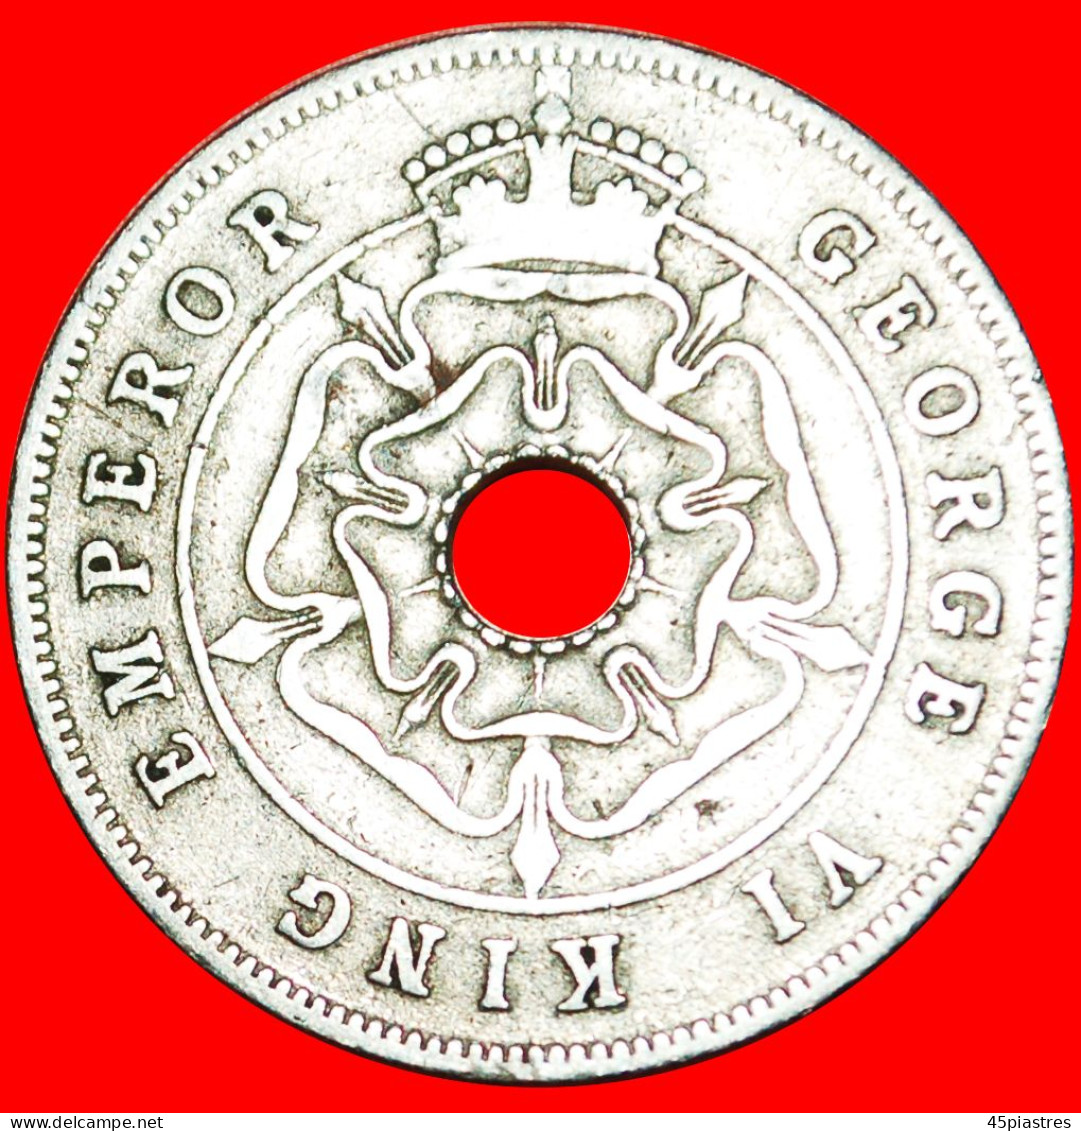 &#9733;CROWNED FLOWER: SOUTHERN RHODESIA &#9733; 1 PENNY 1939! LOW START&#9733;NO RESERVE! George VI (1937-1952) - Rhodesia